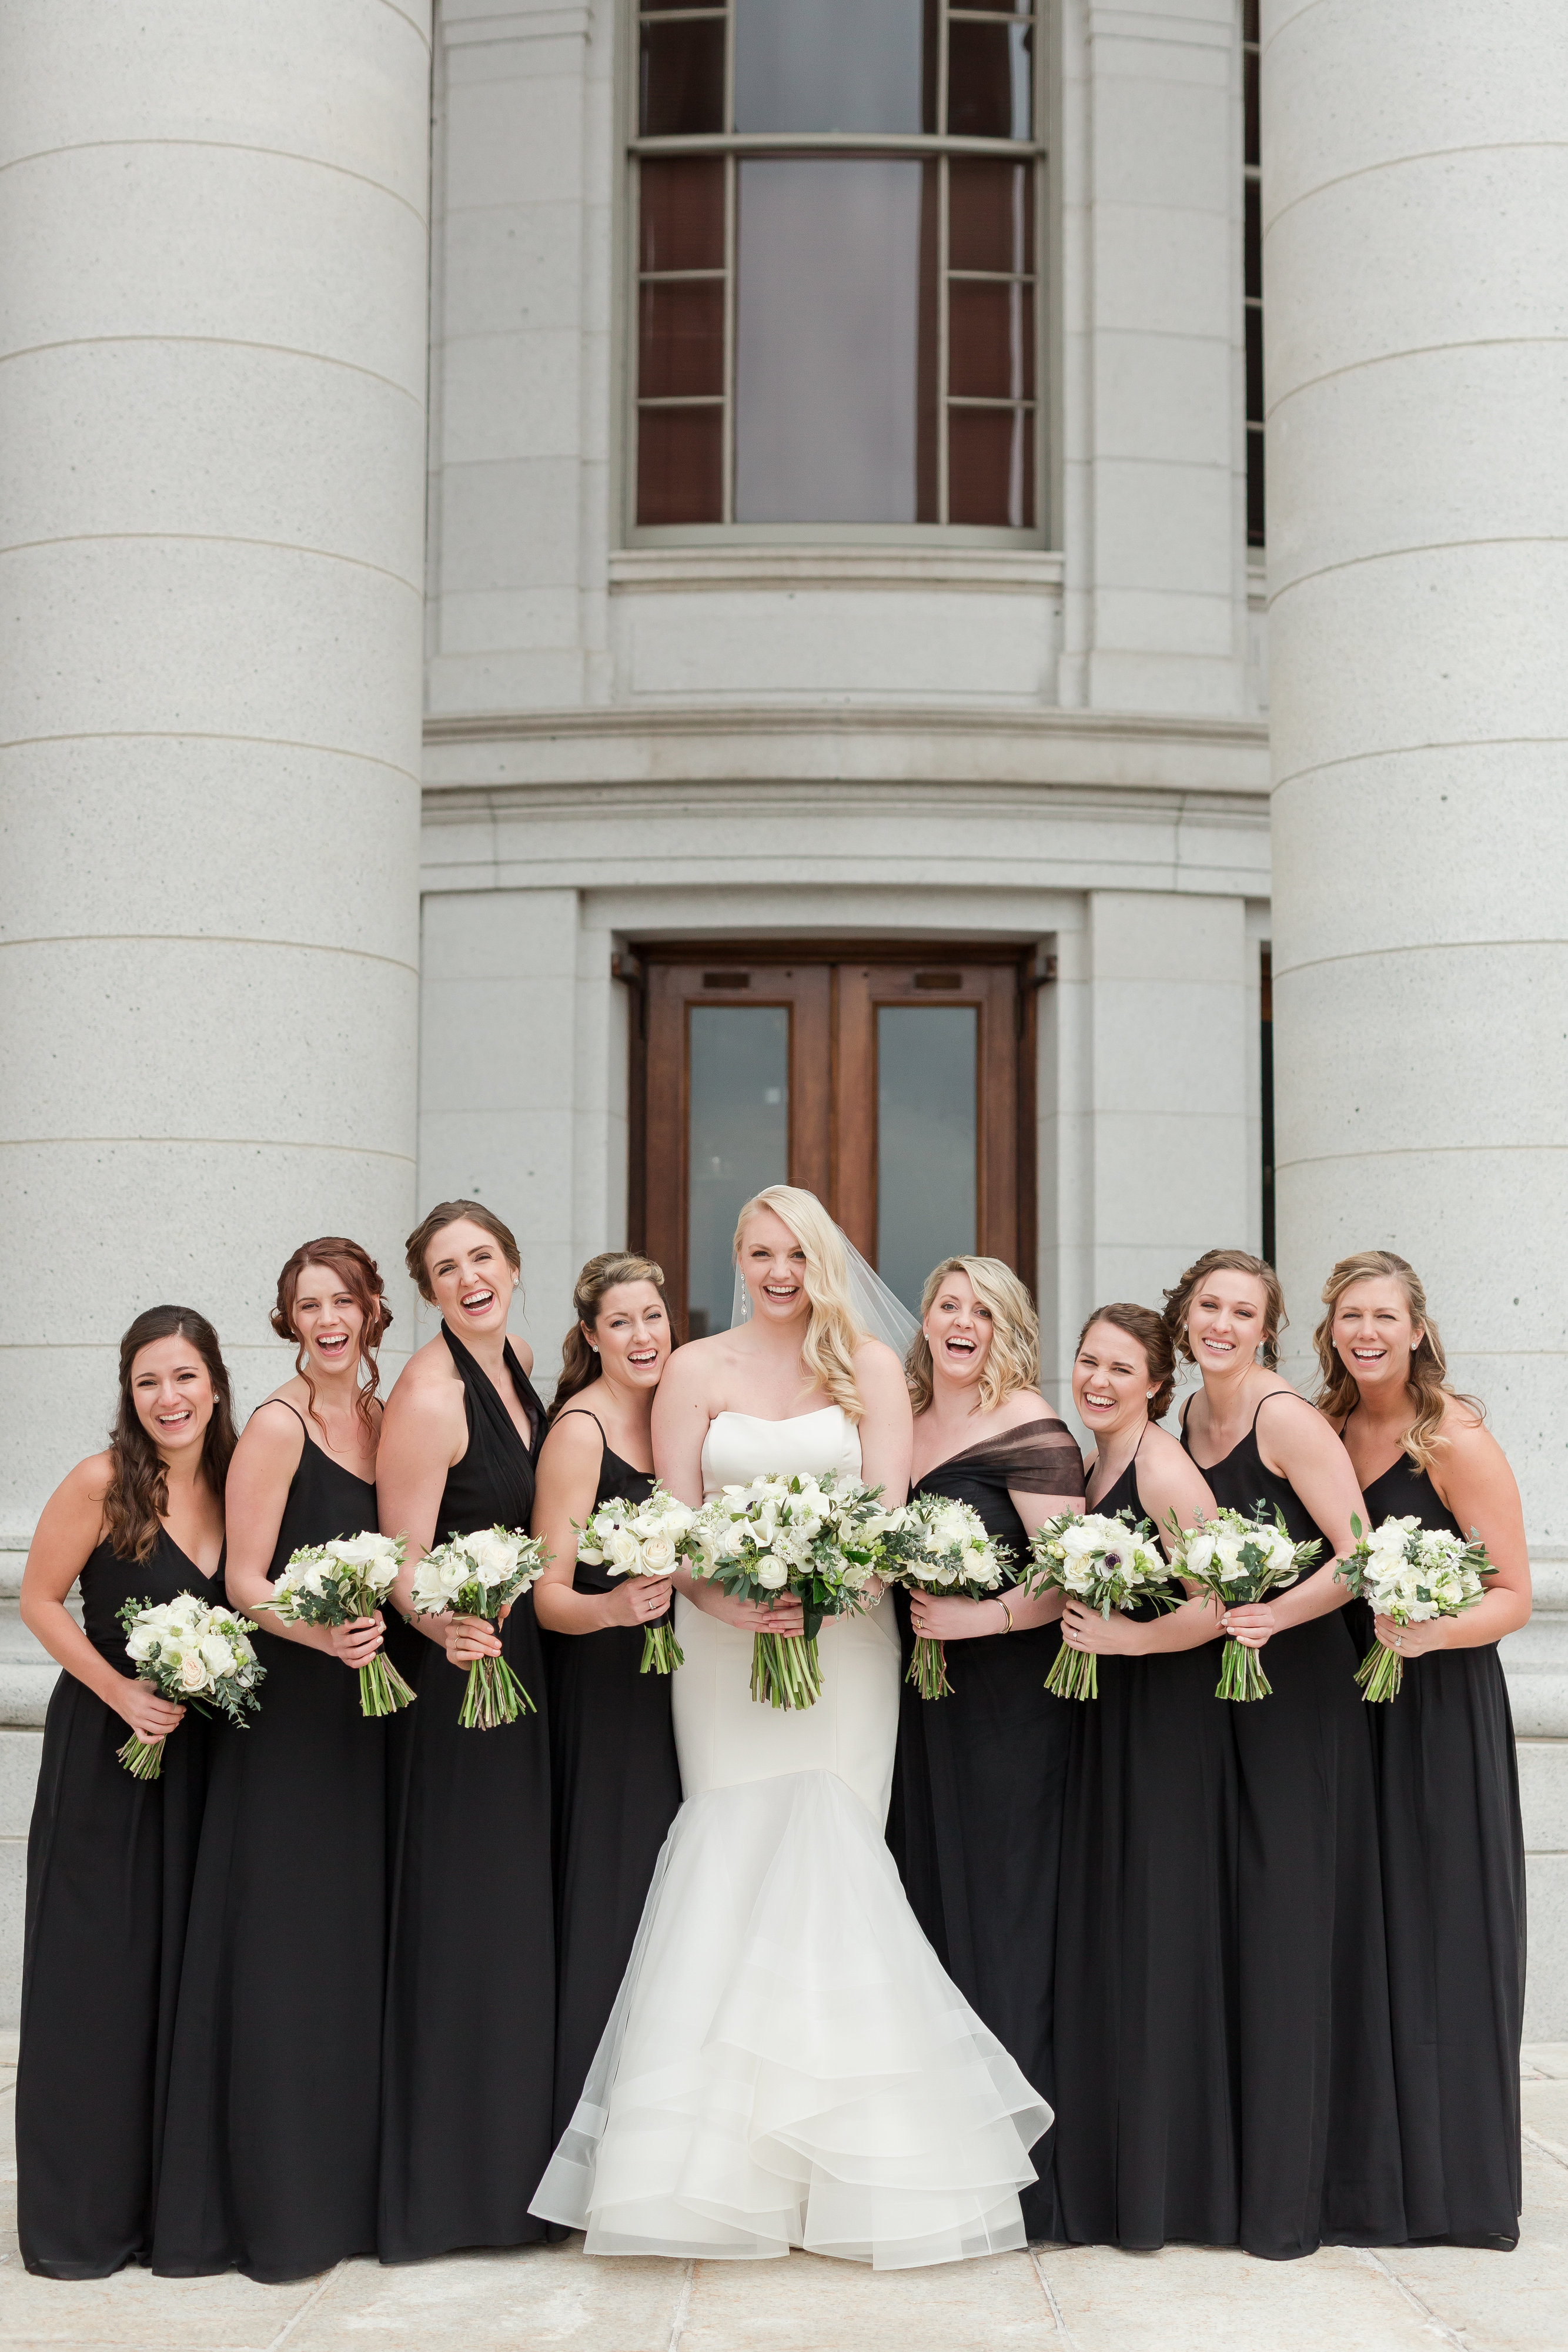 View More: http://maisonmeredith.pass.us/ording-hemer-wedding-submission